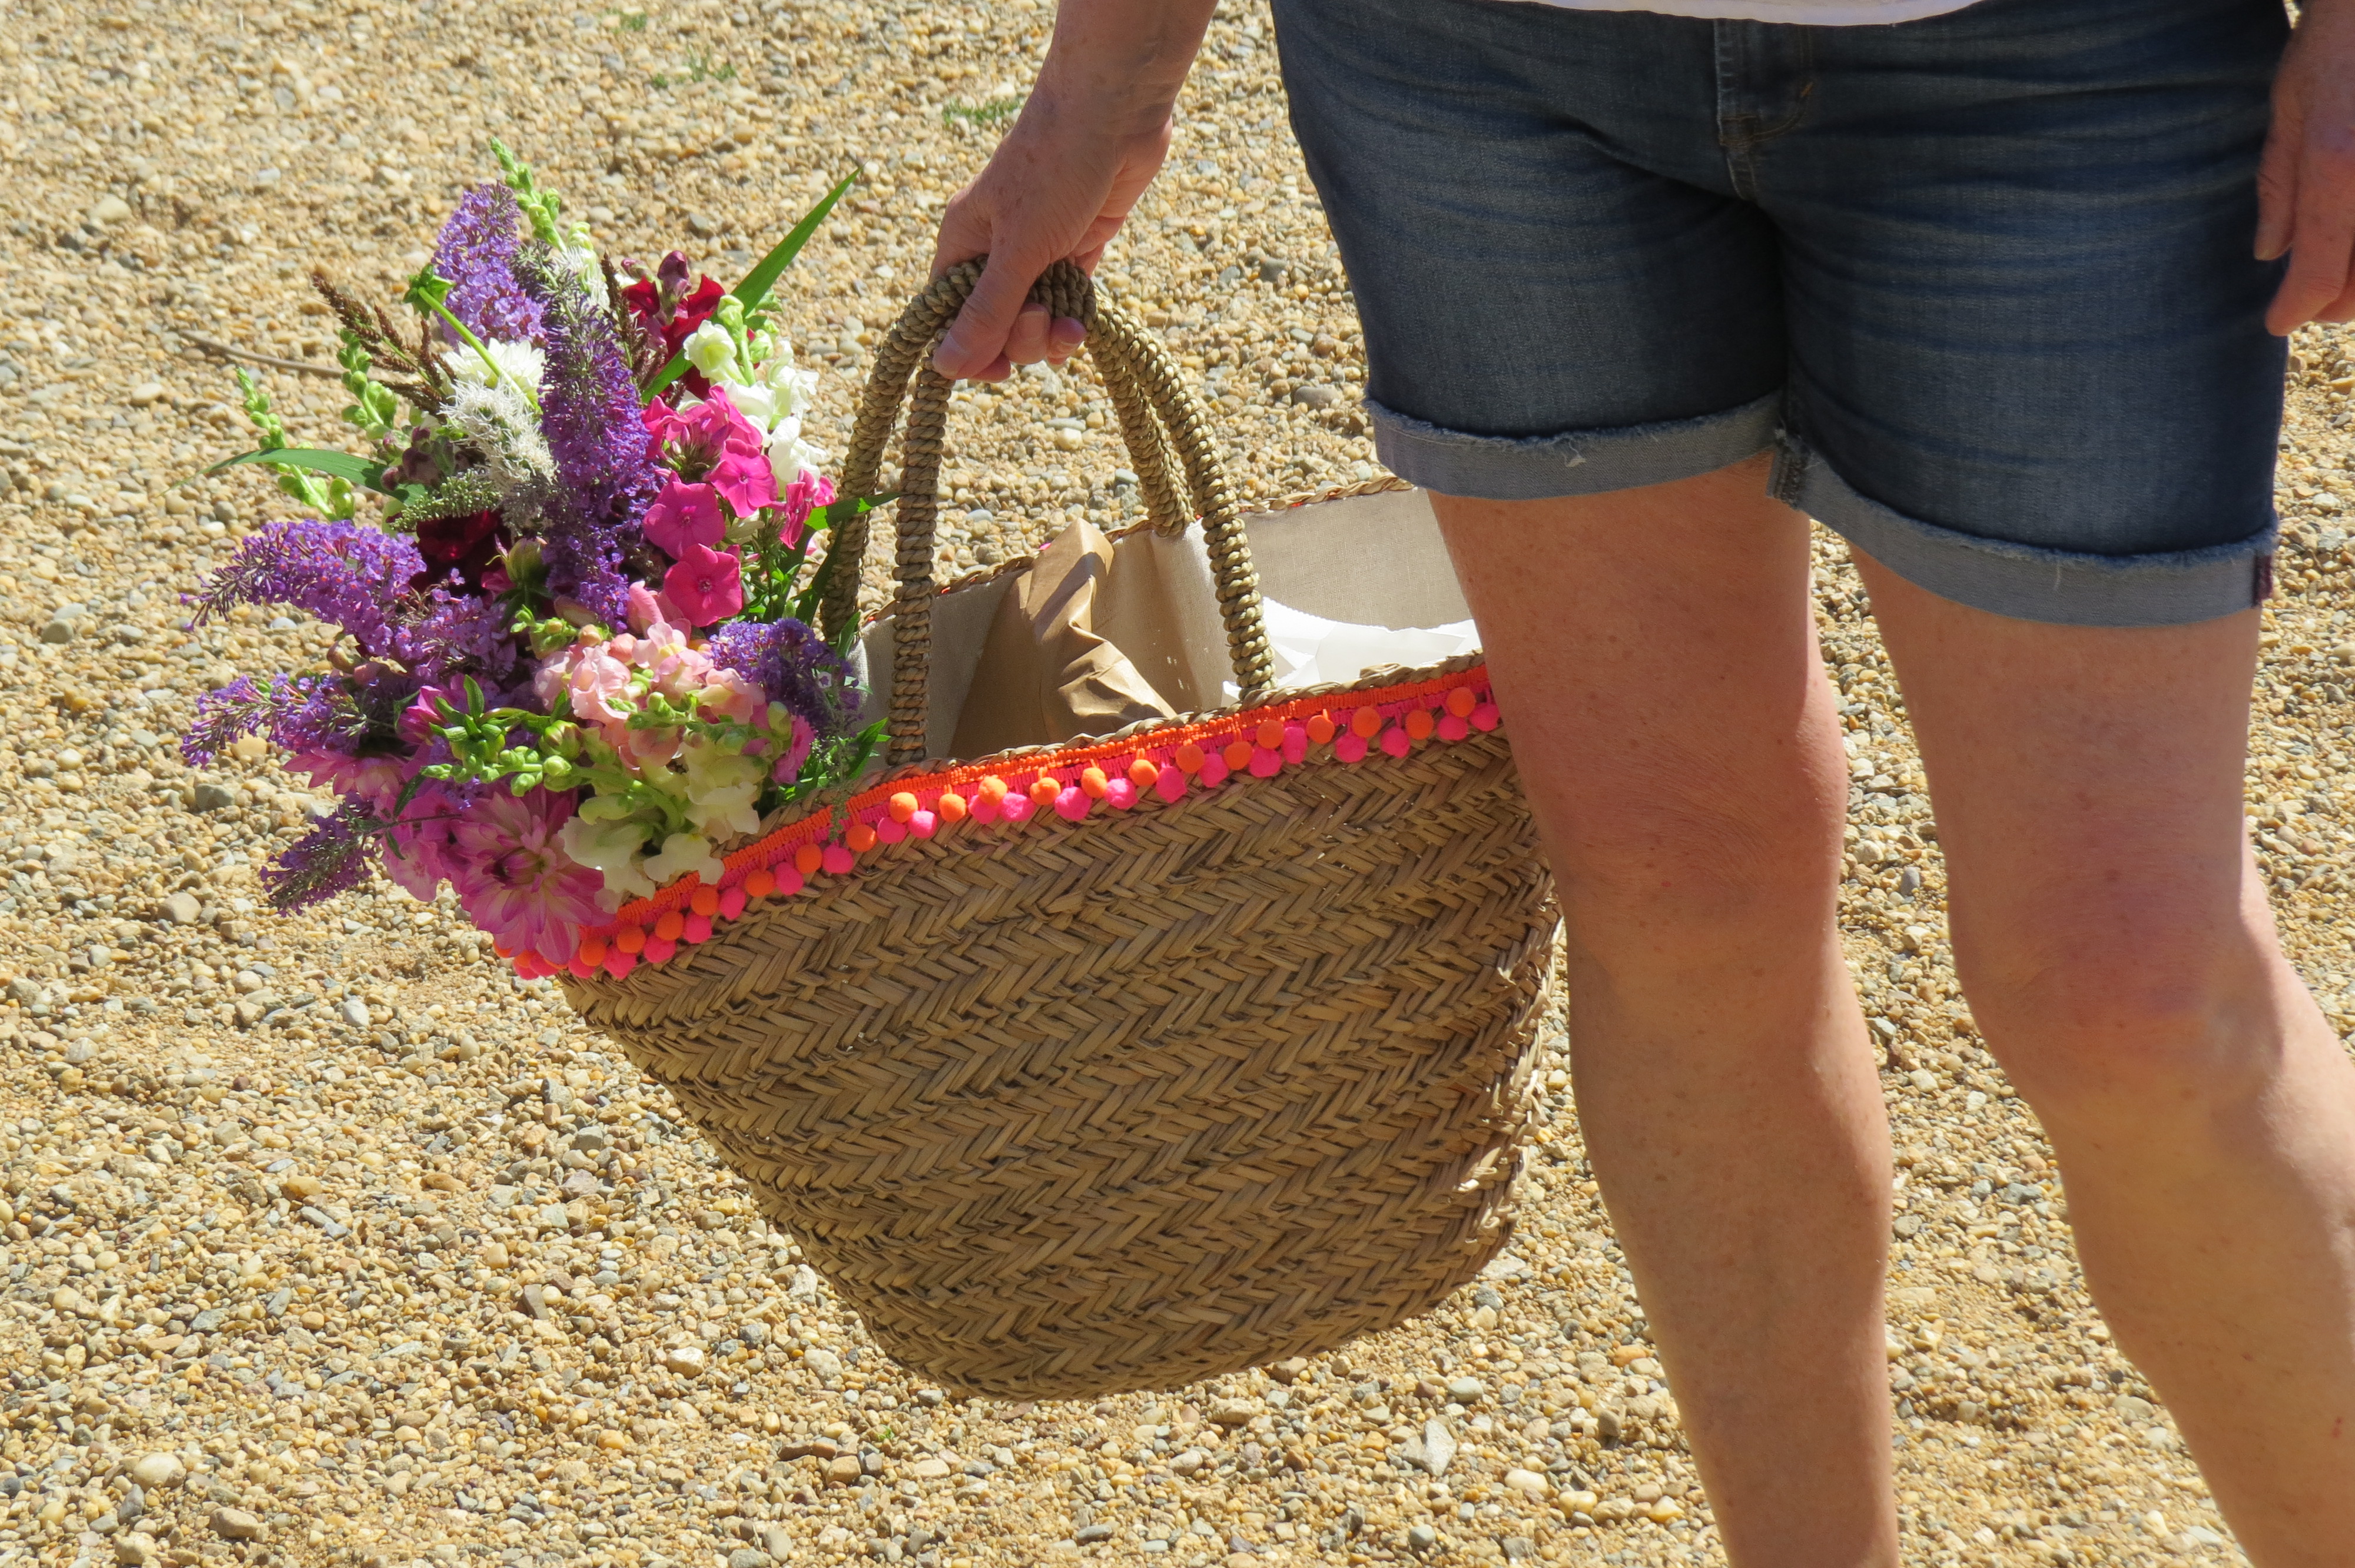 Market Tote with Flowers, West Tisbury Farmers Market